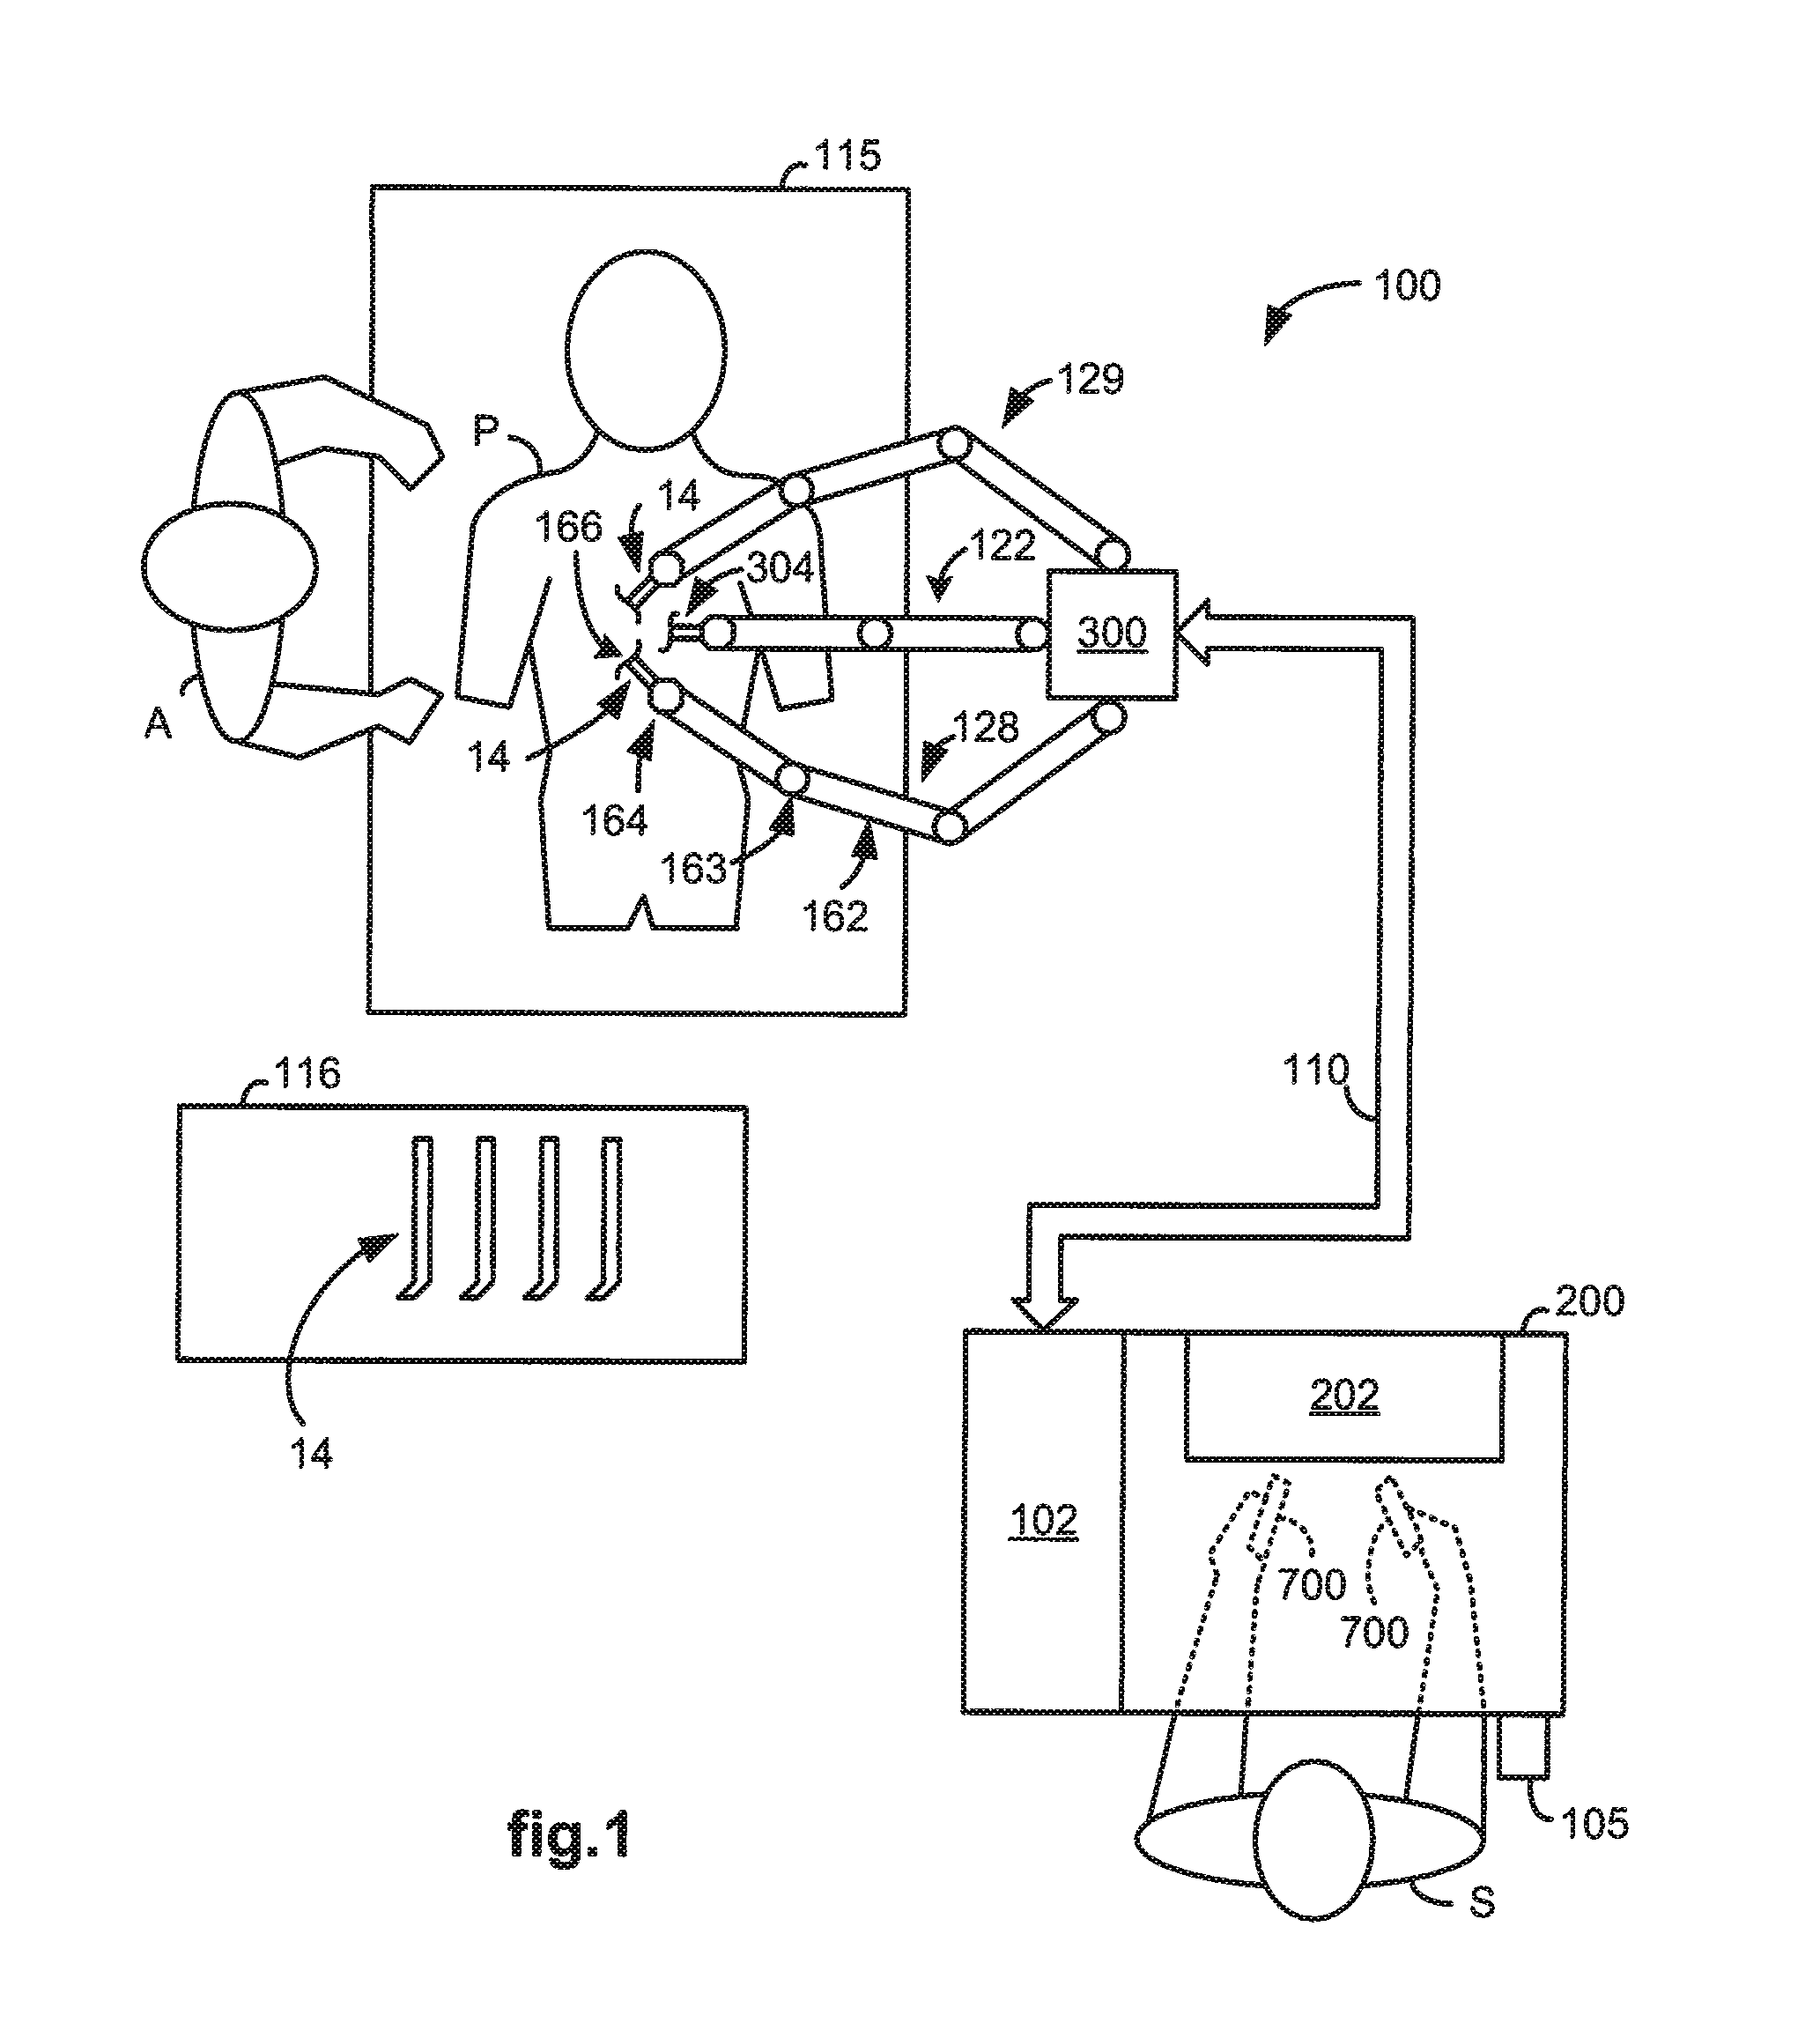 Estimation of a position and orientation of a frame used in controlling movement of a tool